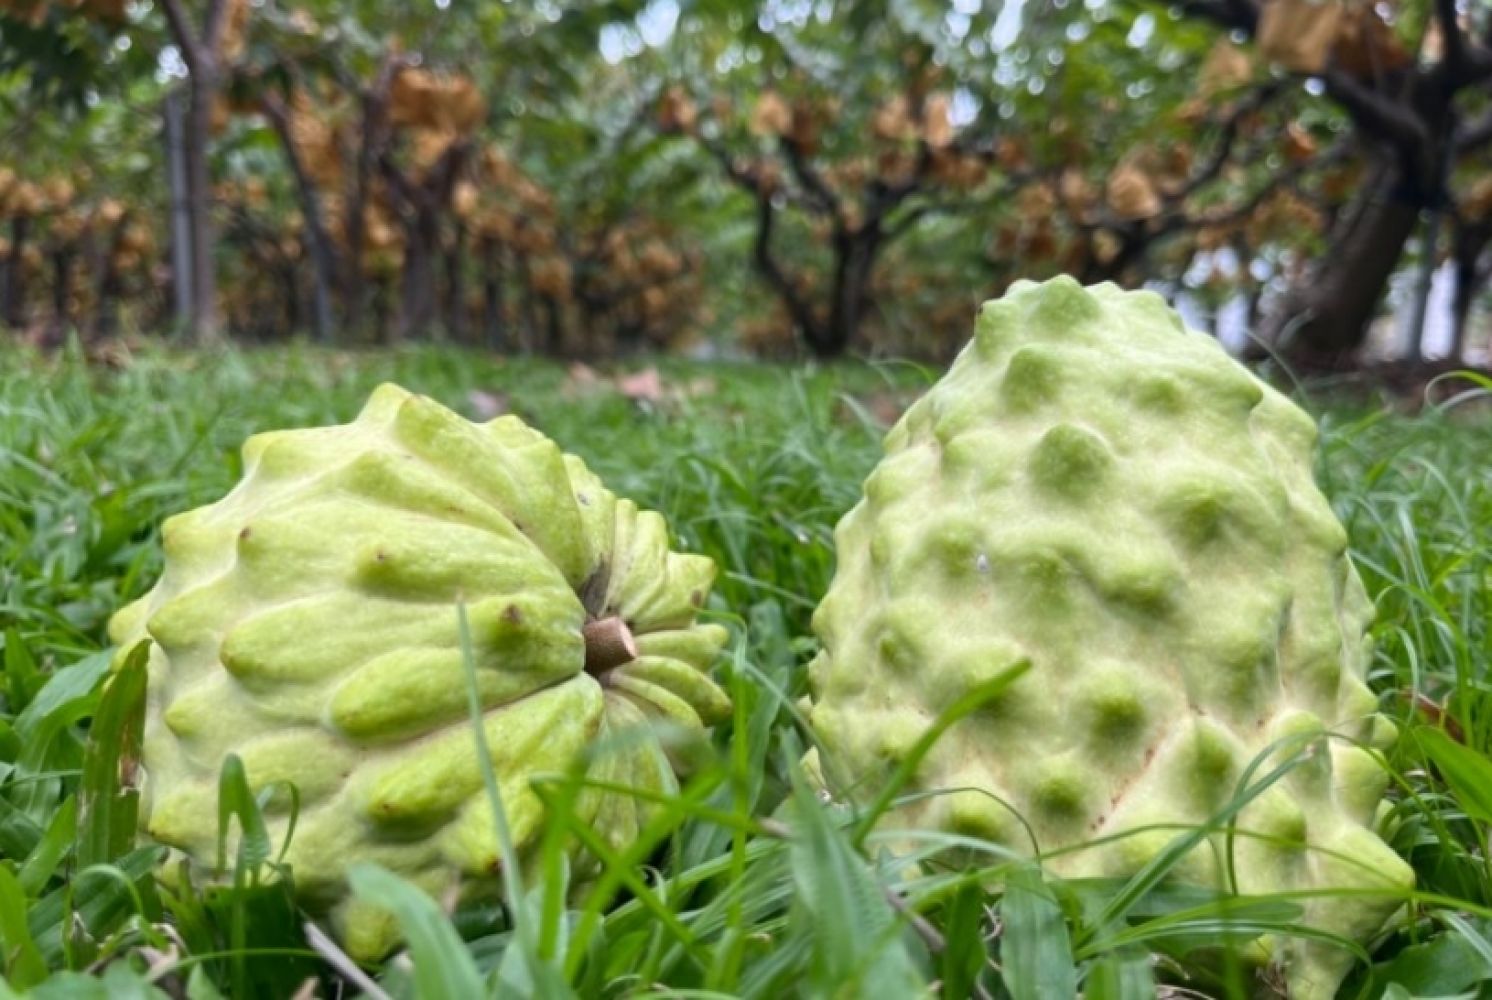 "Unification Campaign" through Pineapples and Custard Apples？How the DPP Has Confidence to Talk Nonsense